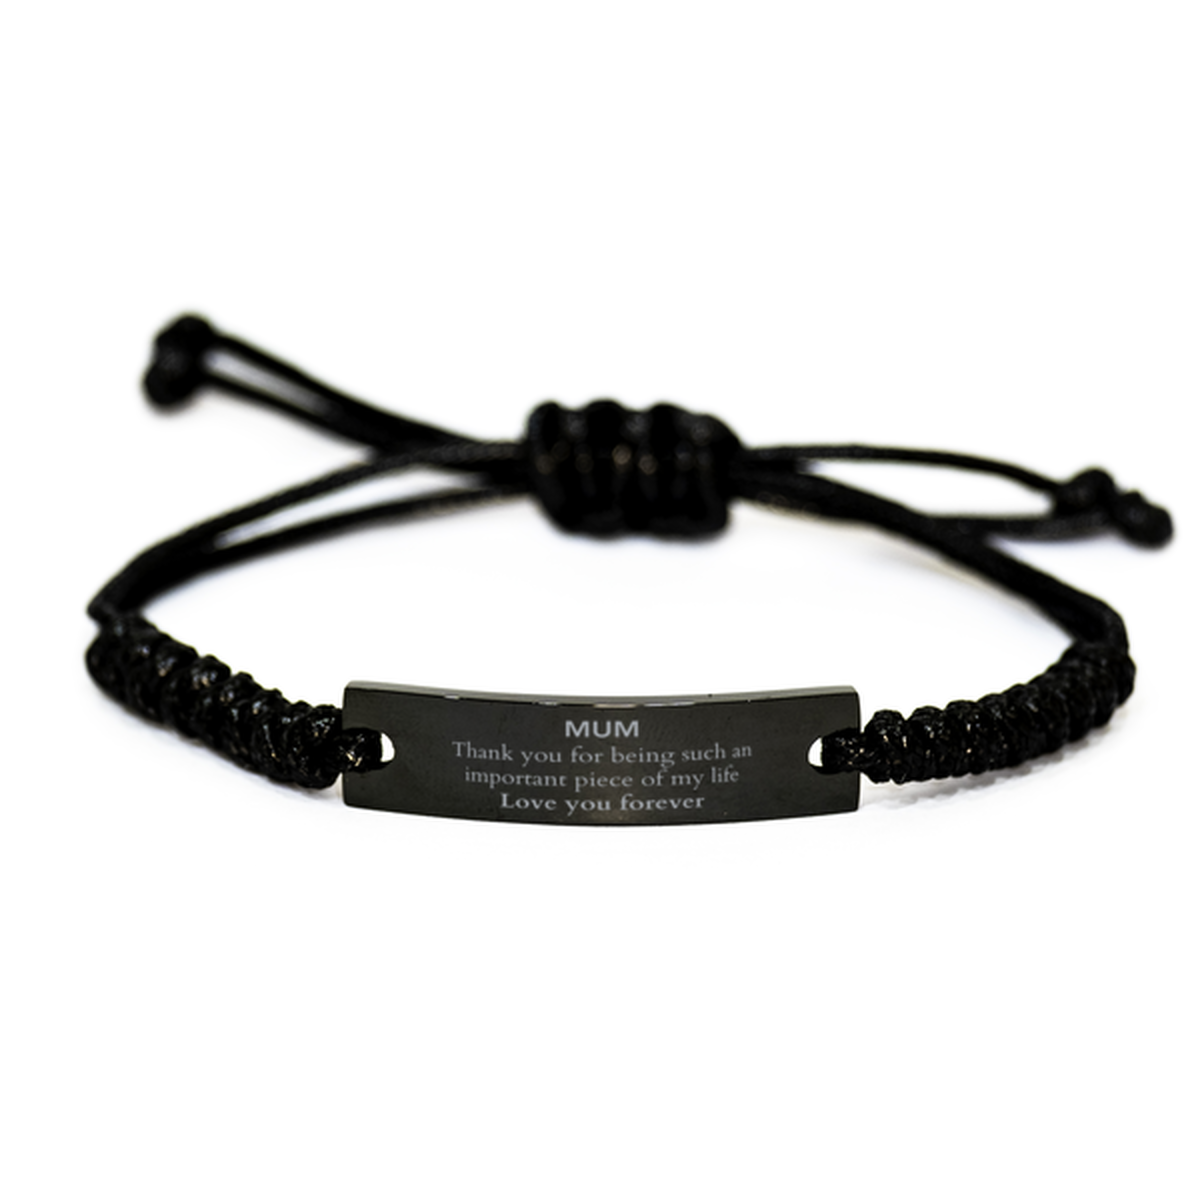 Appropriate Mum Black Rope Bracelet Epic Birthday Gifts for Mum Thank you for being such an important piece of my life Mum Christmas Mothers Fathers Day